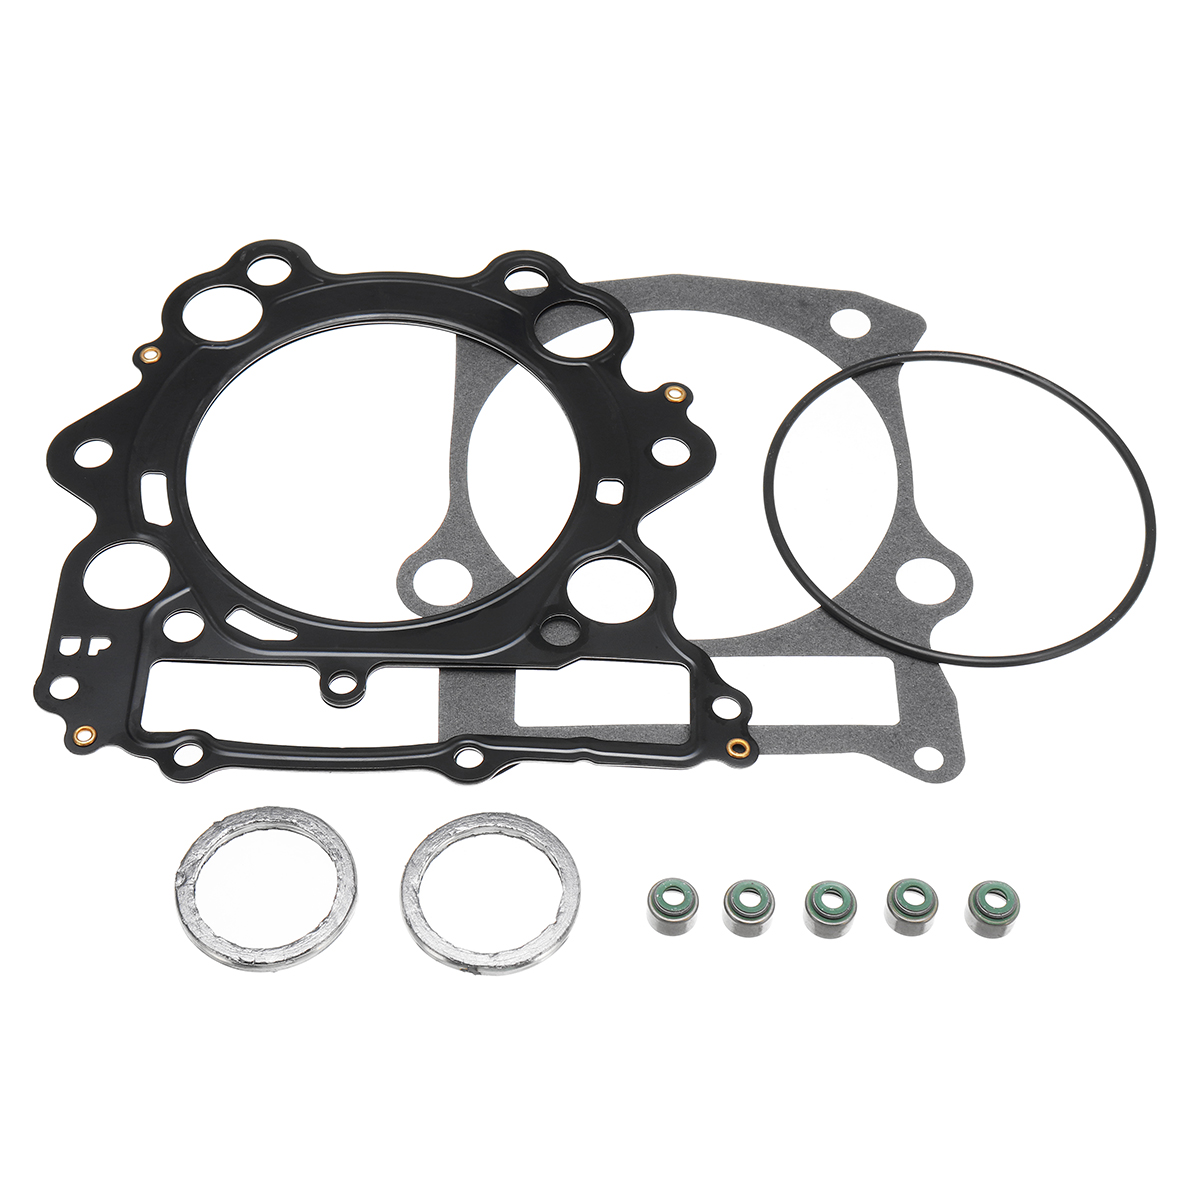 Top End Clutch Cylinder Full Engine Gasket Kit for YAMAHA GRIZZLY 600 1998-2001